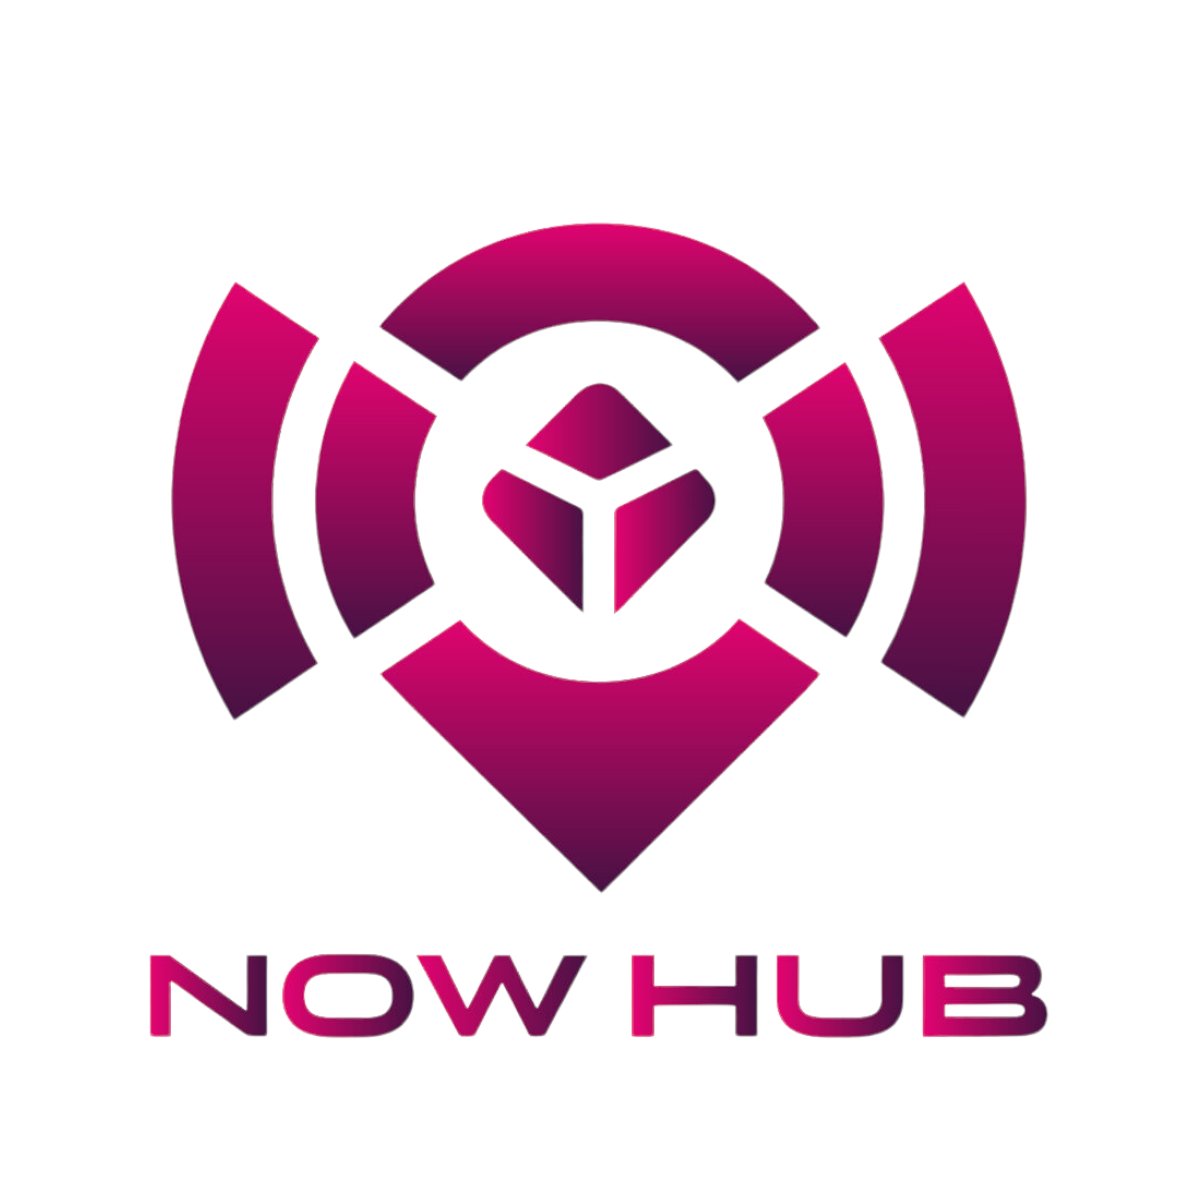 #ToEarnNow #NOW #ActionTeam #nowhub #blockchainmarketing #NFTCommunity #đàonow #Nowcoin #metaverse